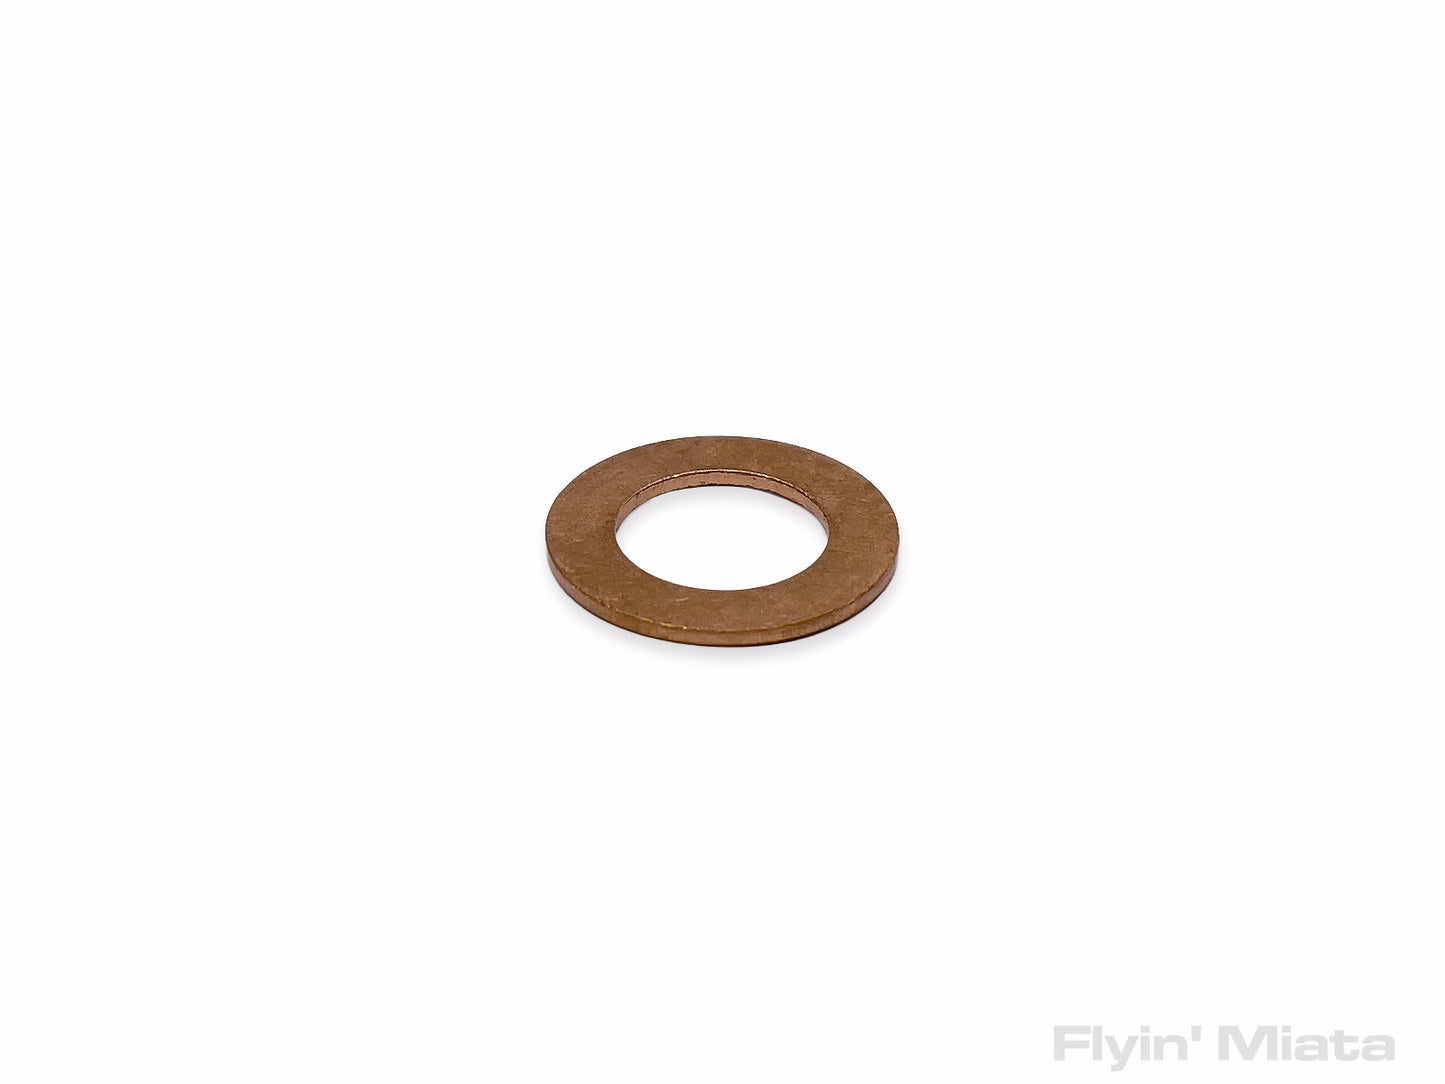 Washer for magnetic oil plug